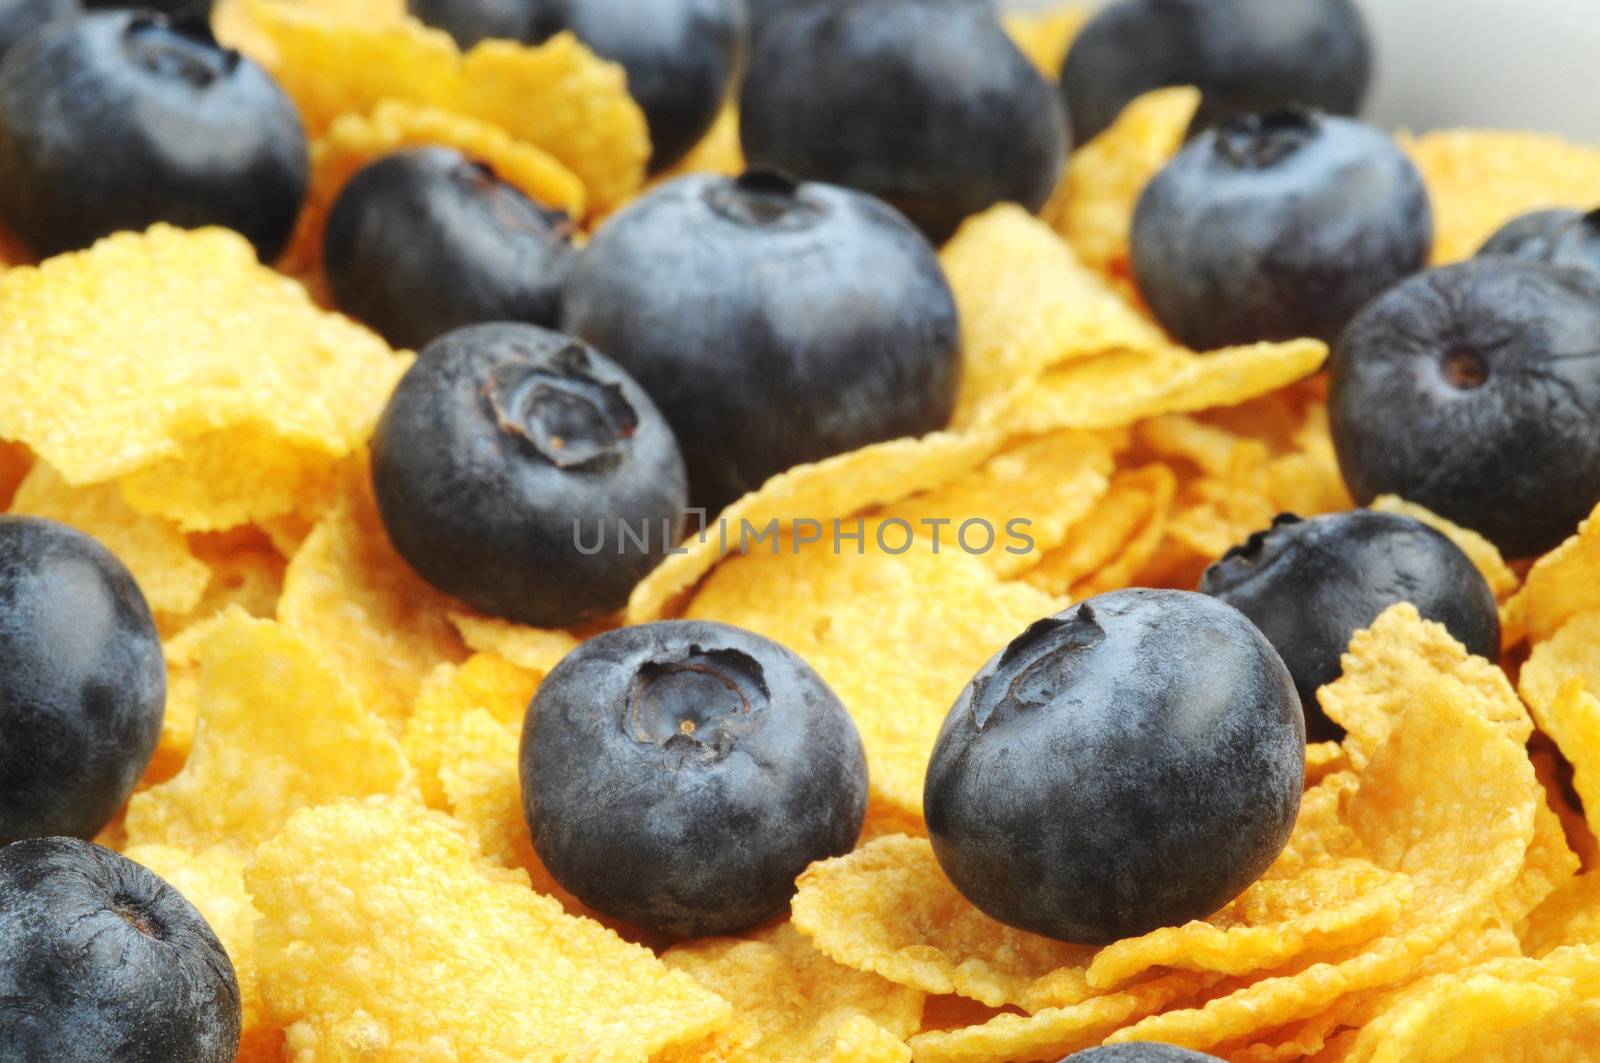 Blueberries by billberryphotography